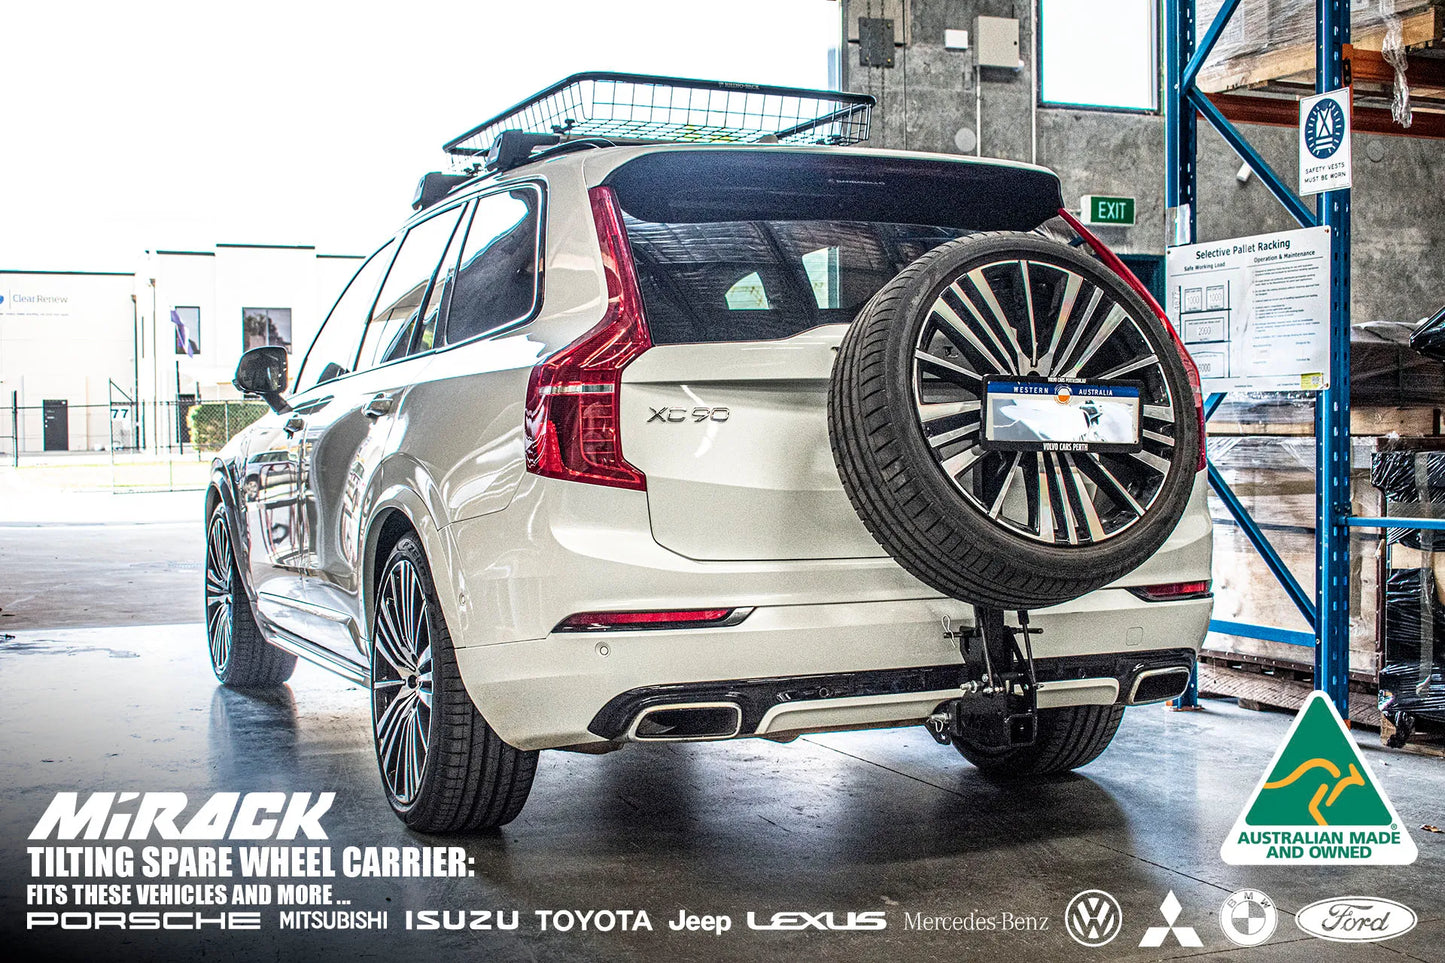 Enhance adventure accessibility & functionality: Tilting spare wheel carrier for Volvo XC60, XC70, XC90 (tow hitch).